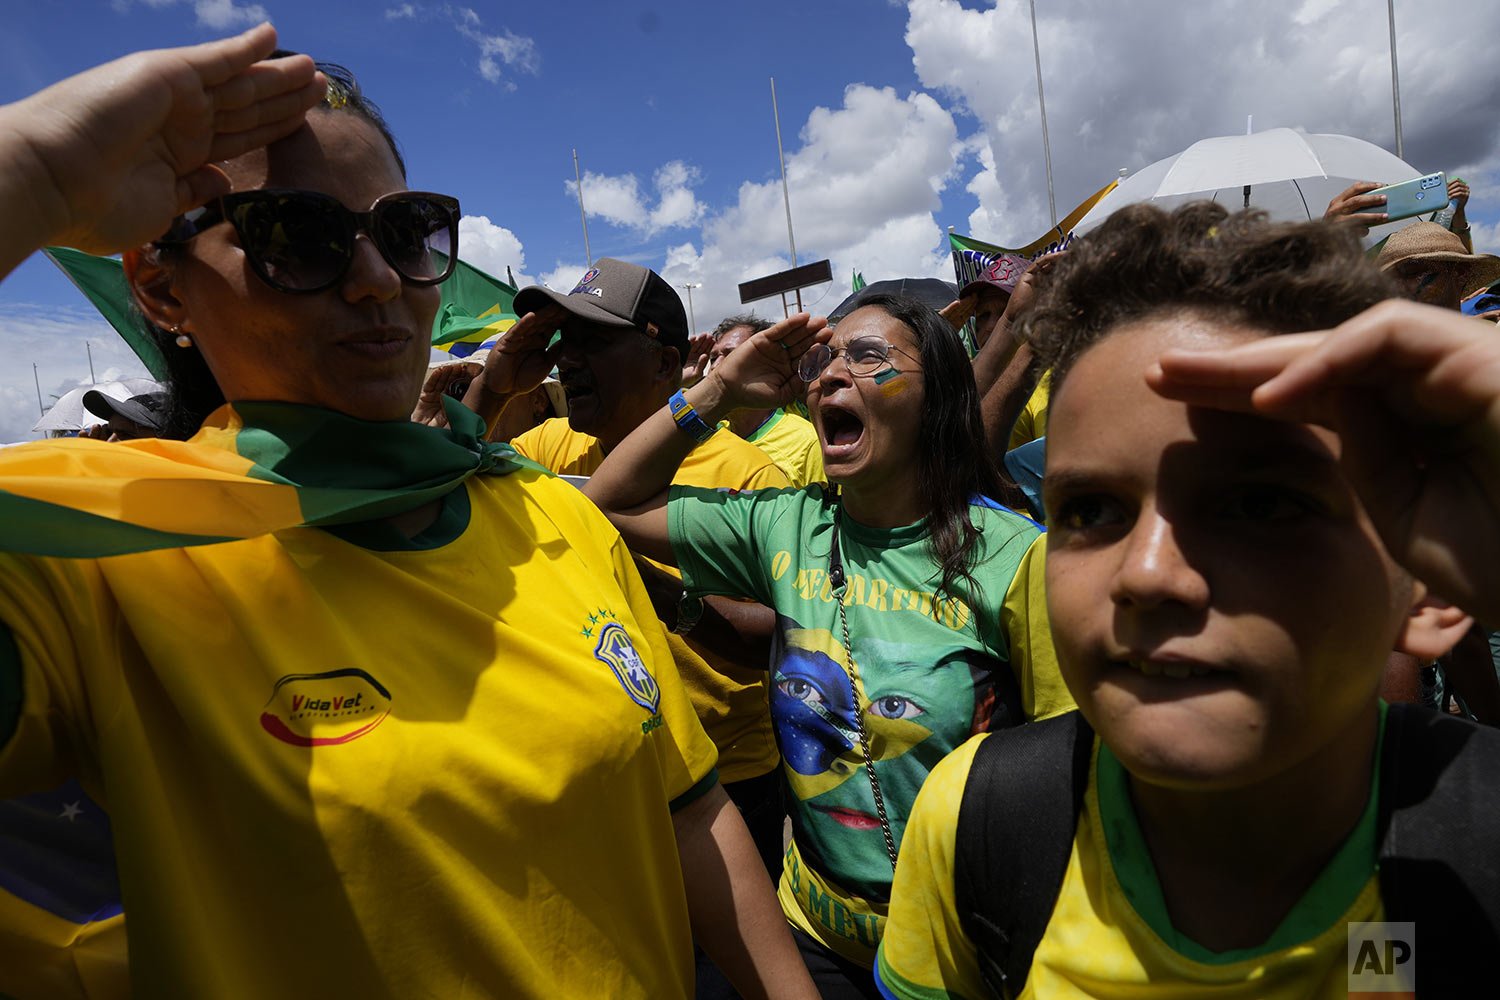  Supporters of Brazilian President Jair Bolsonaro salute and sing their national anthem during a protest against Bolsonaro's run-off election loss outside the Army headquarters in Brasilia, Brazil, Tuesday, Nov. 15, 2022. (AP Photo/Eraldo Peres) 